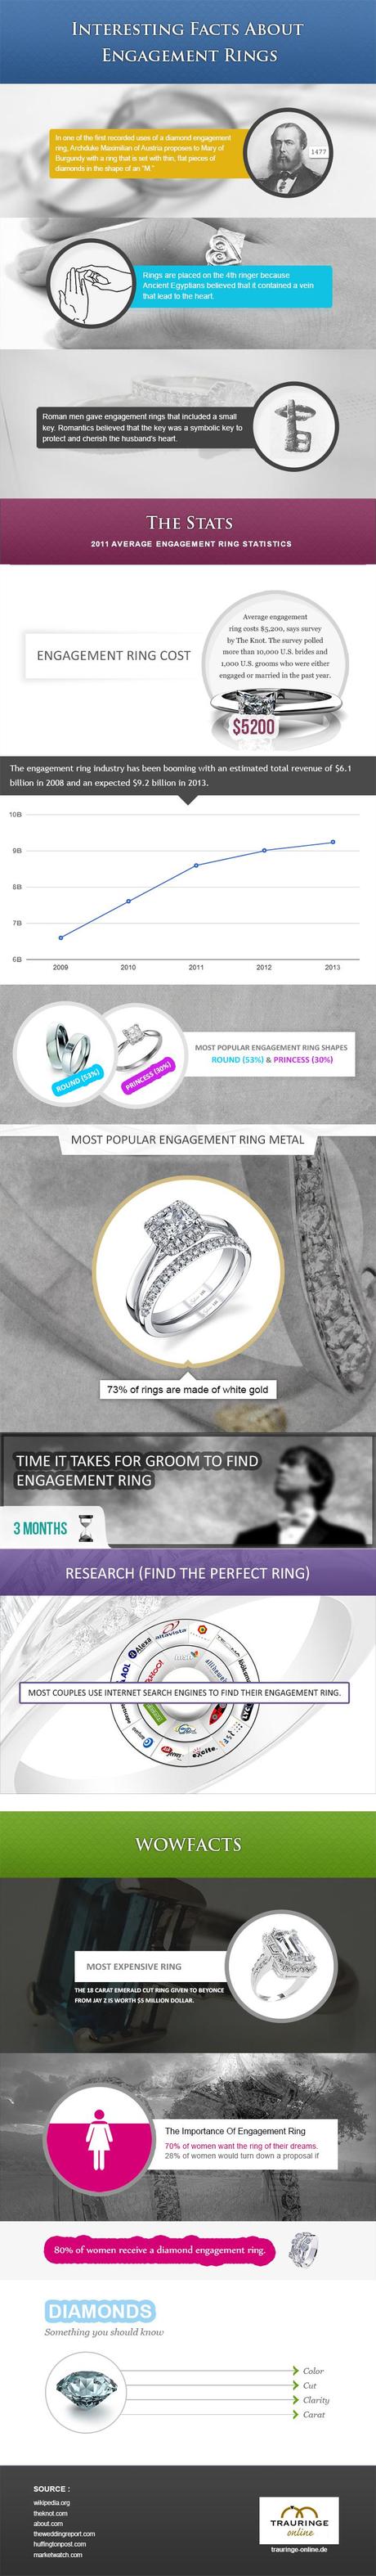 Interesting Facts On Engagement Rings Infographic